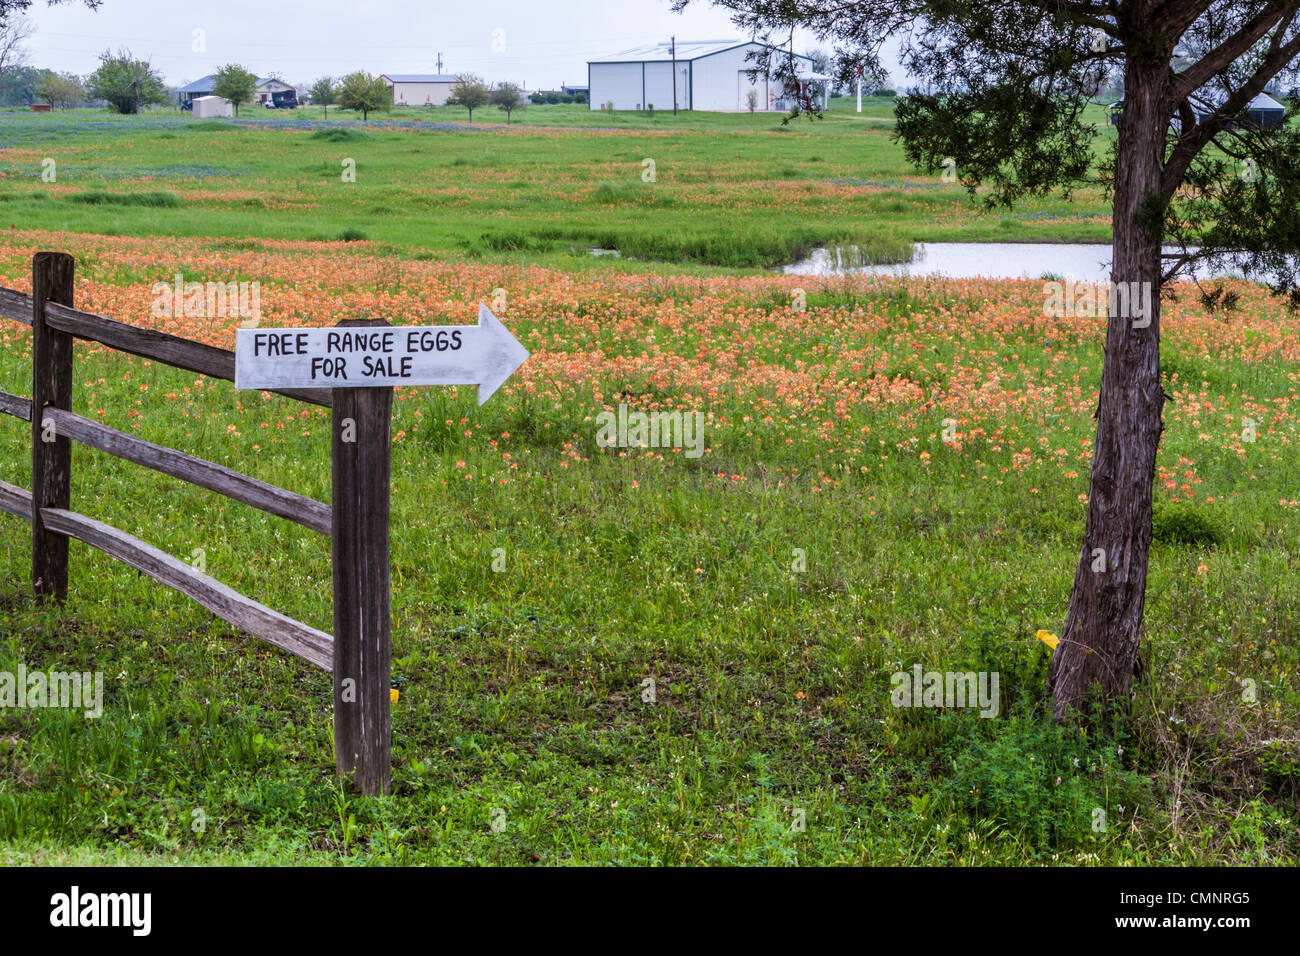 Sign indicating eggs for sale near a field of Indian Paintbrush wildflowers near Whitehall, Texas. Stock Photo